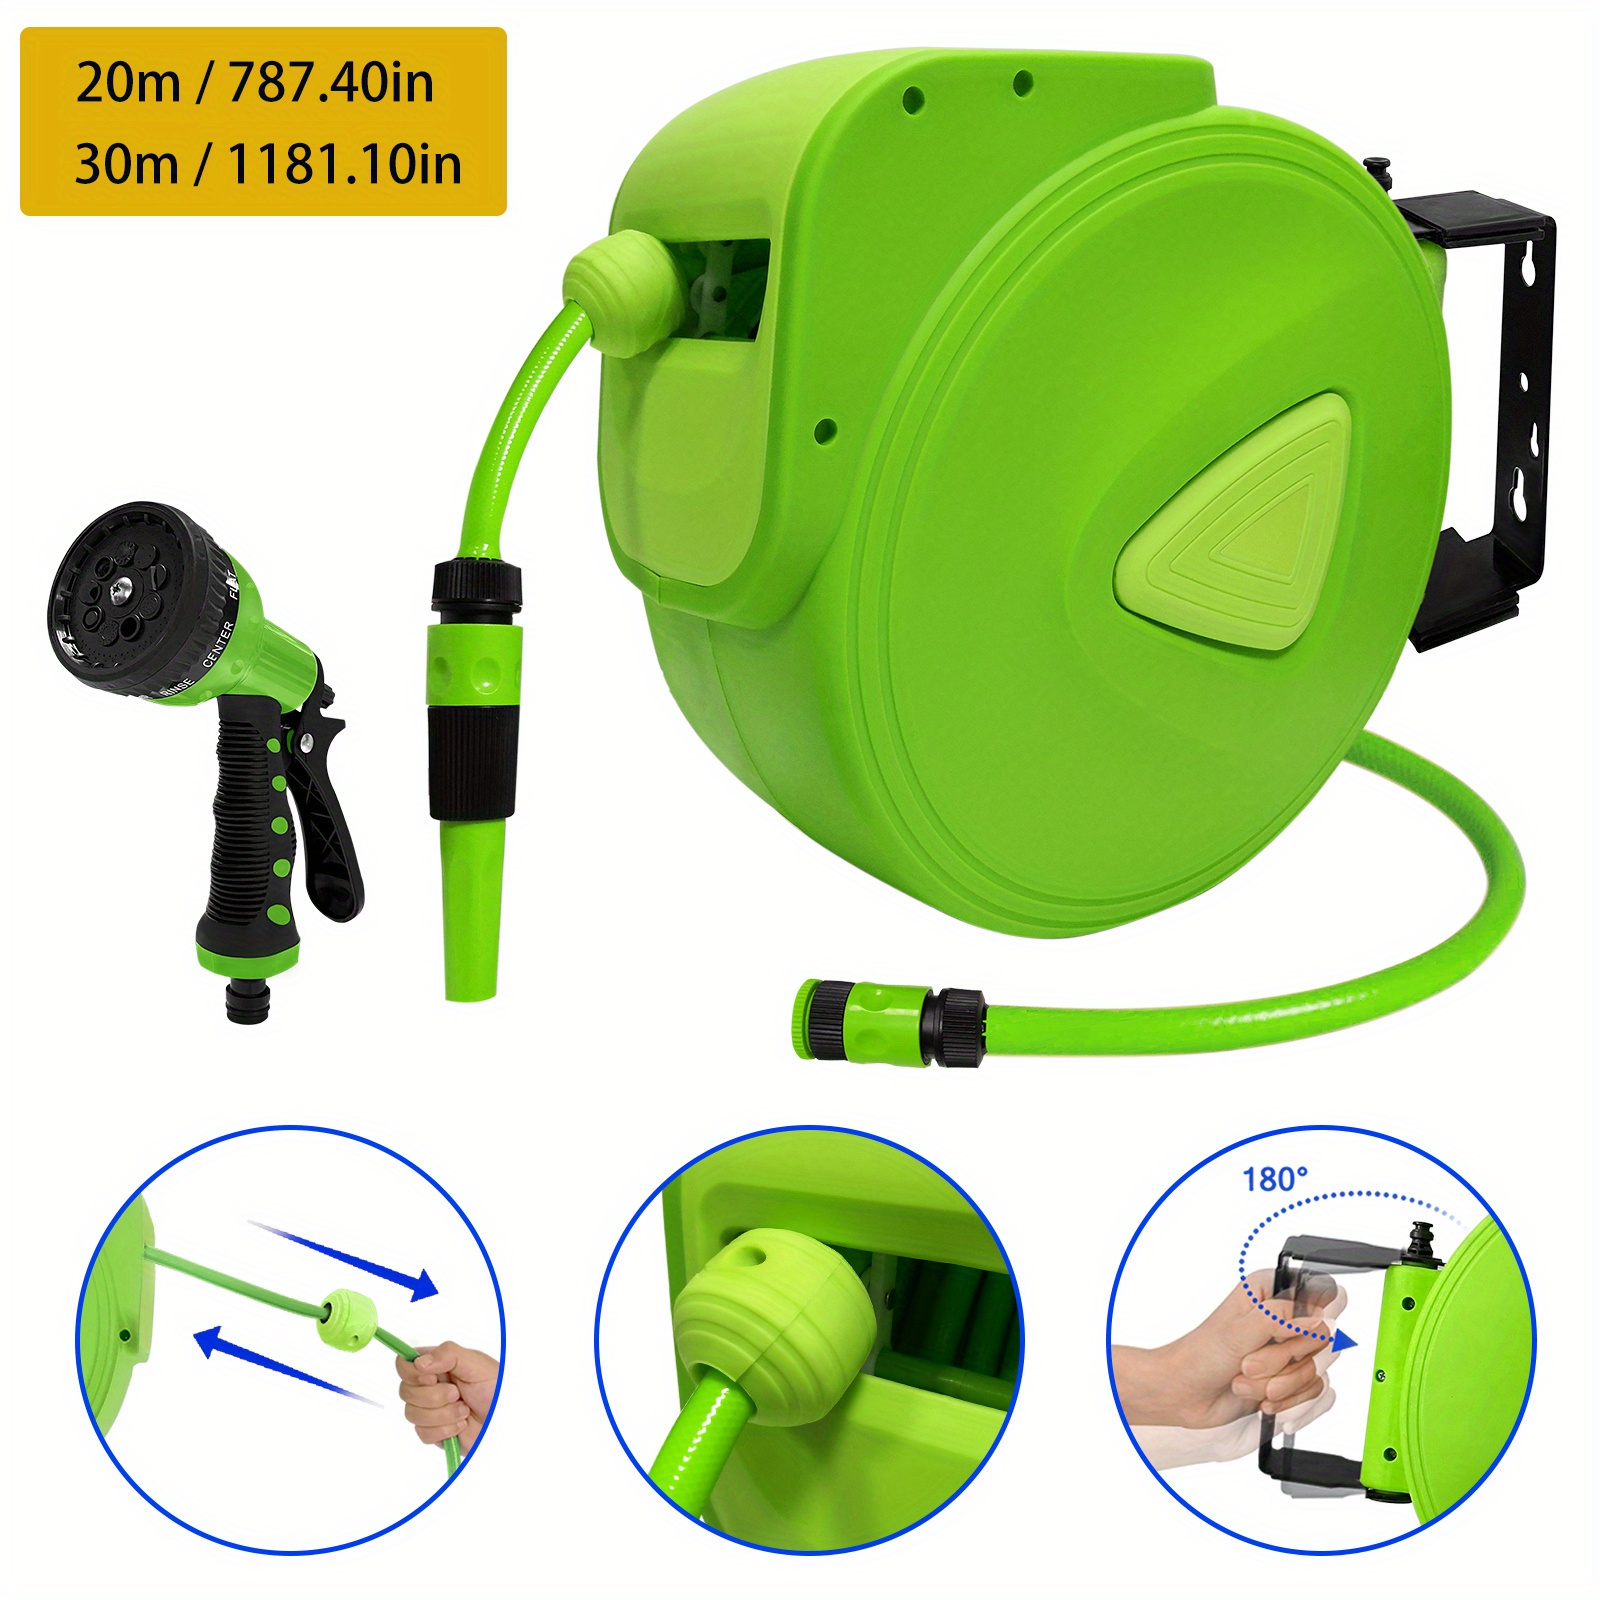 

Froadp Hose Reel Water Automatic 20m/30m With 2 M Hose Wall Mounted 180° Swivel Hose Reel 3/4 Inch Connection Garden Hose Box For Garden, Watering, Car Washing